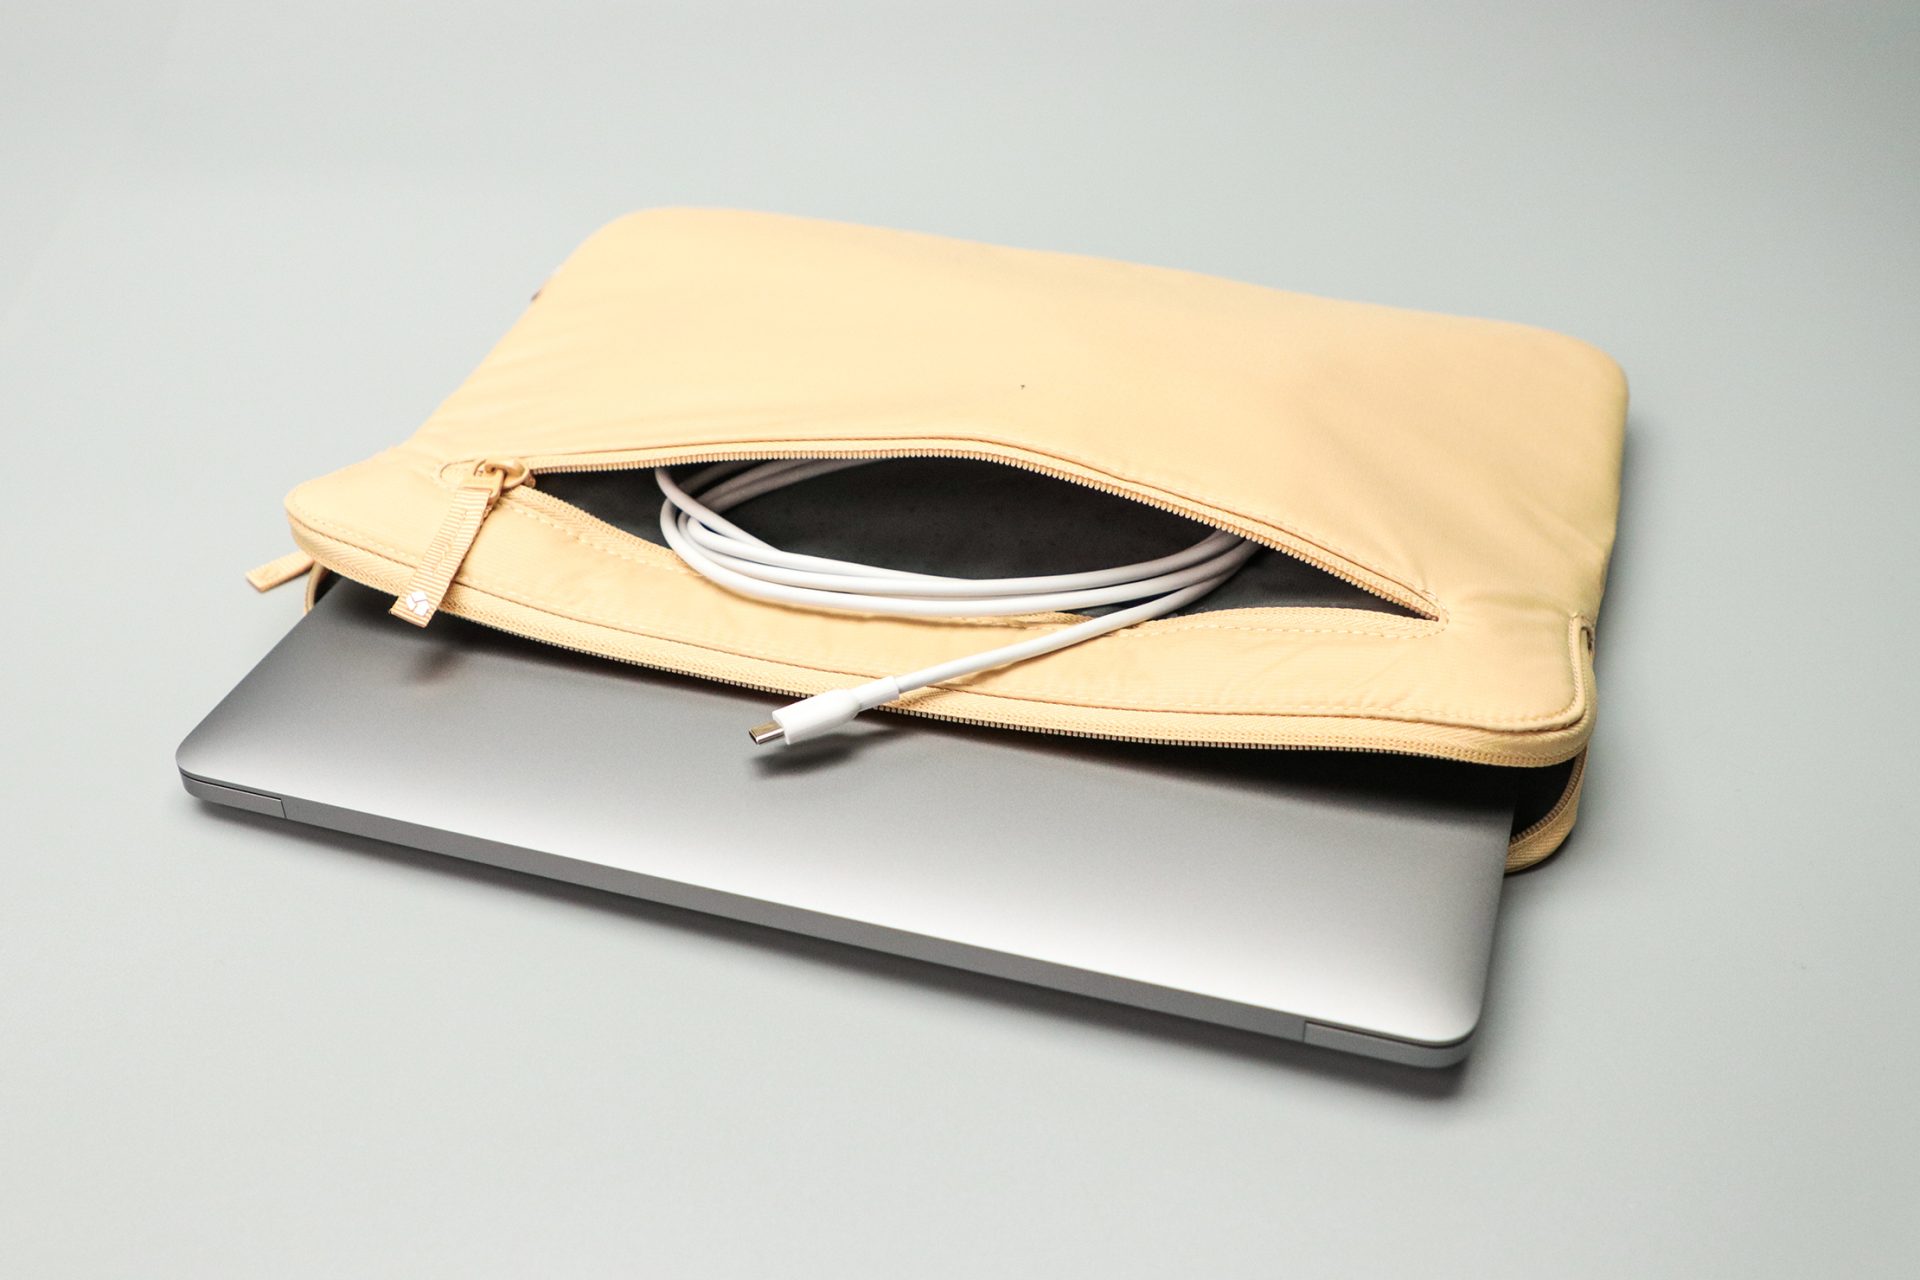 Incase Compact Sleeve with BIONIC front pocket